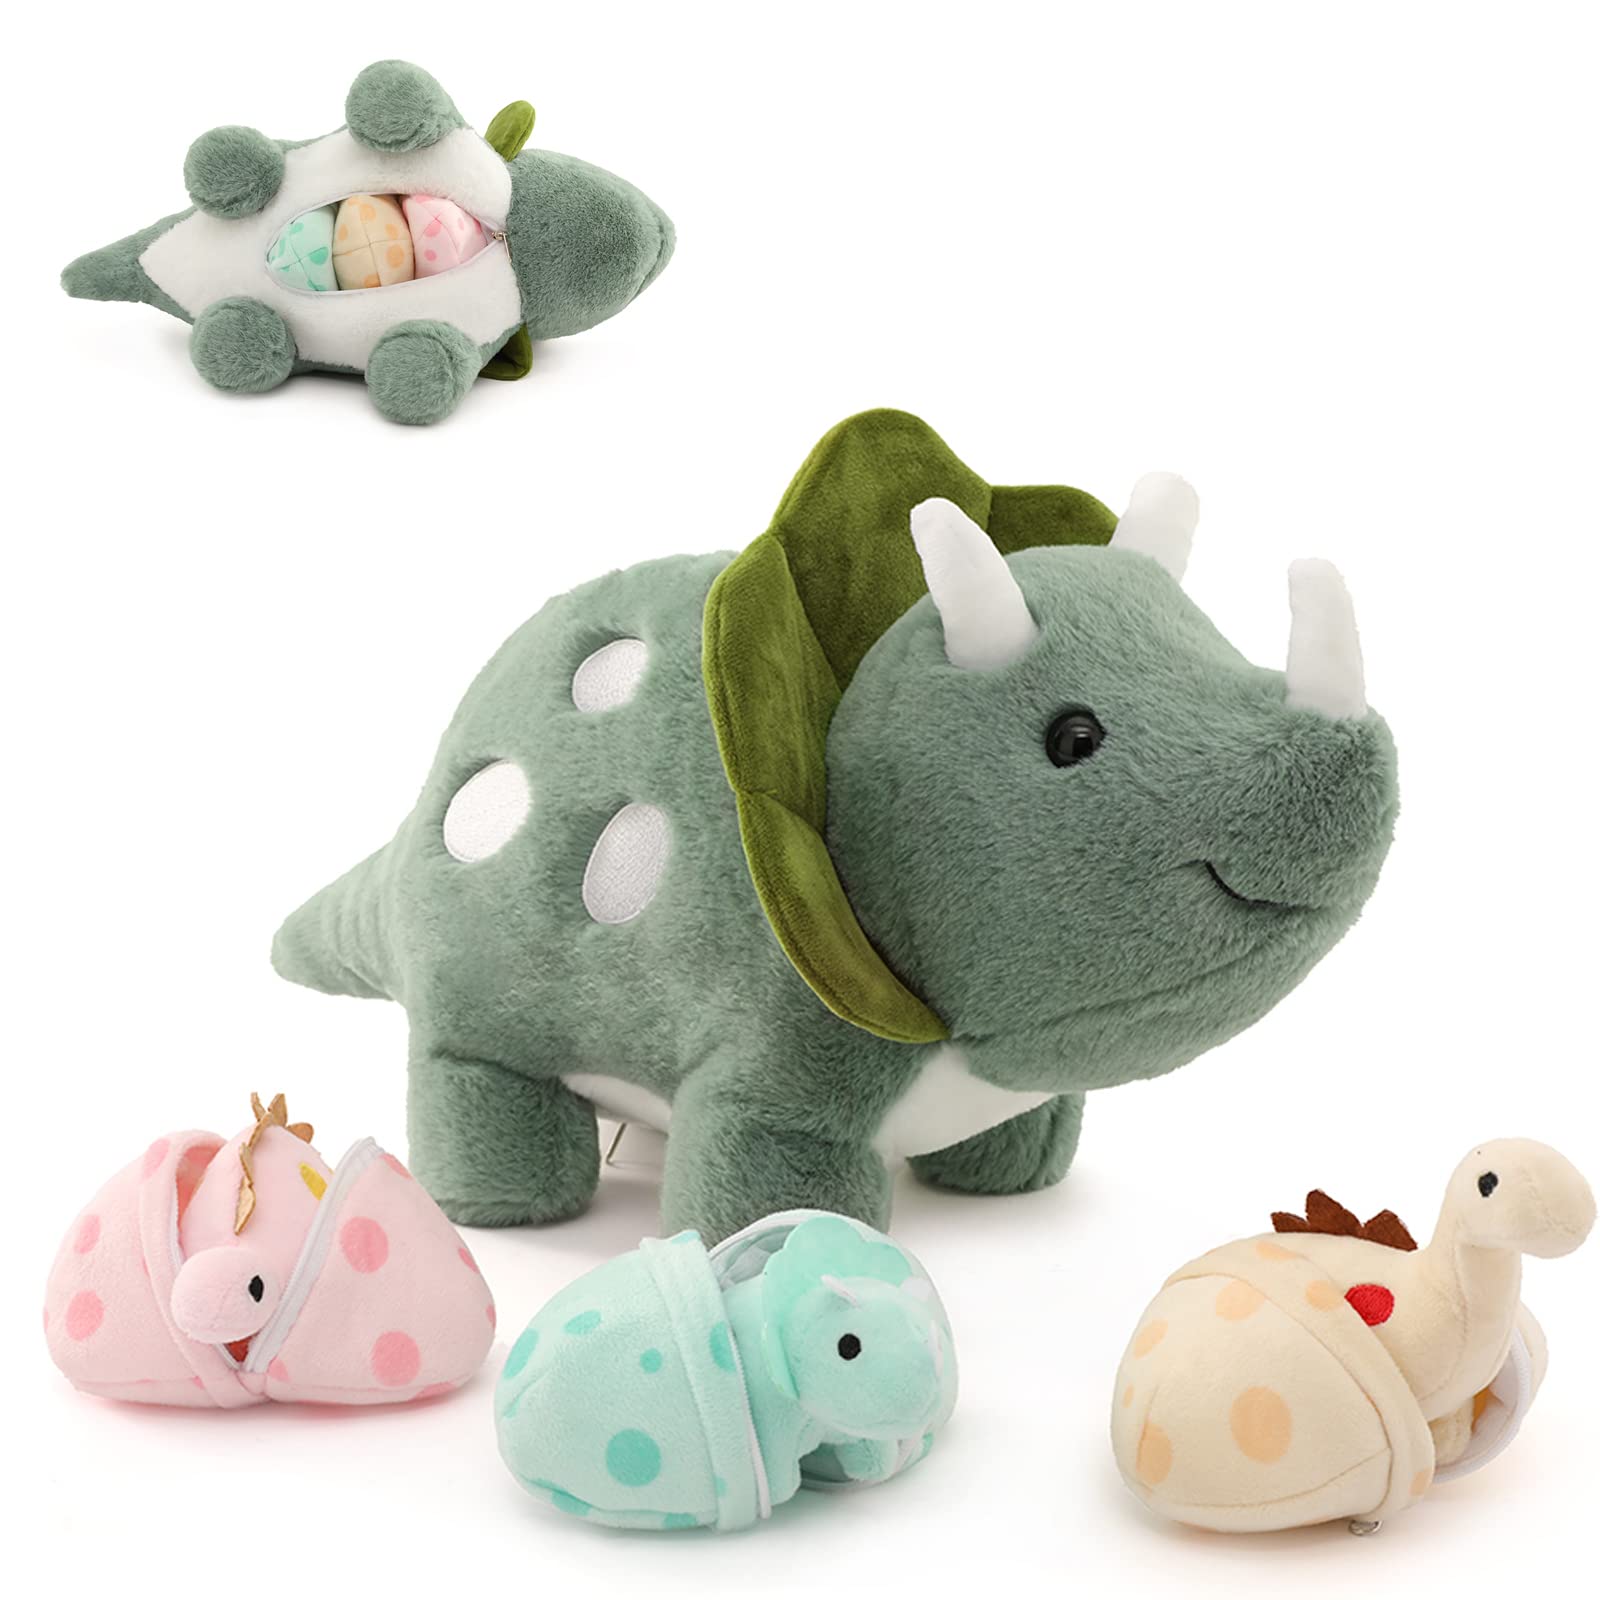 Dinosaur Plush Toy with 3 Baby Dinosaurs, Green/Pink, 17.6 Inches